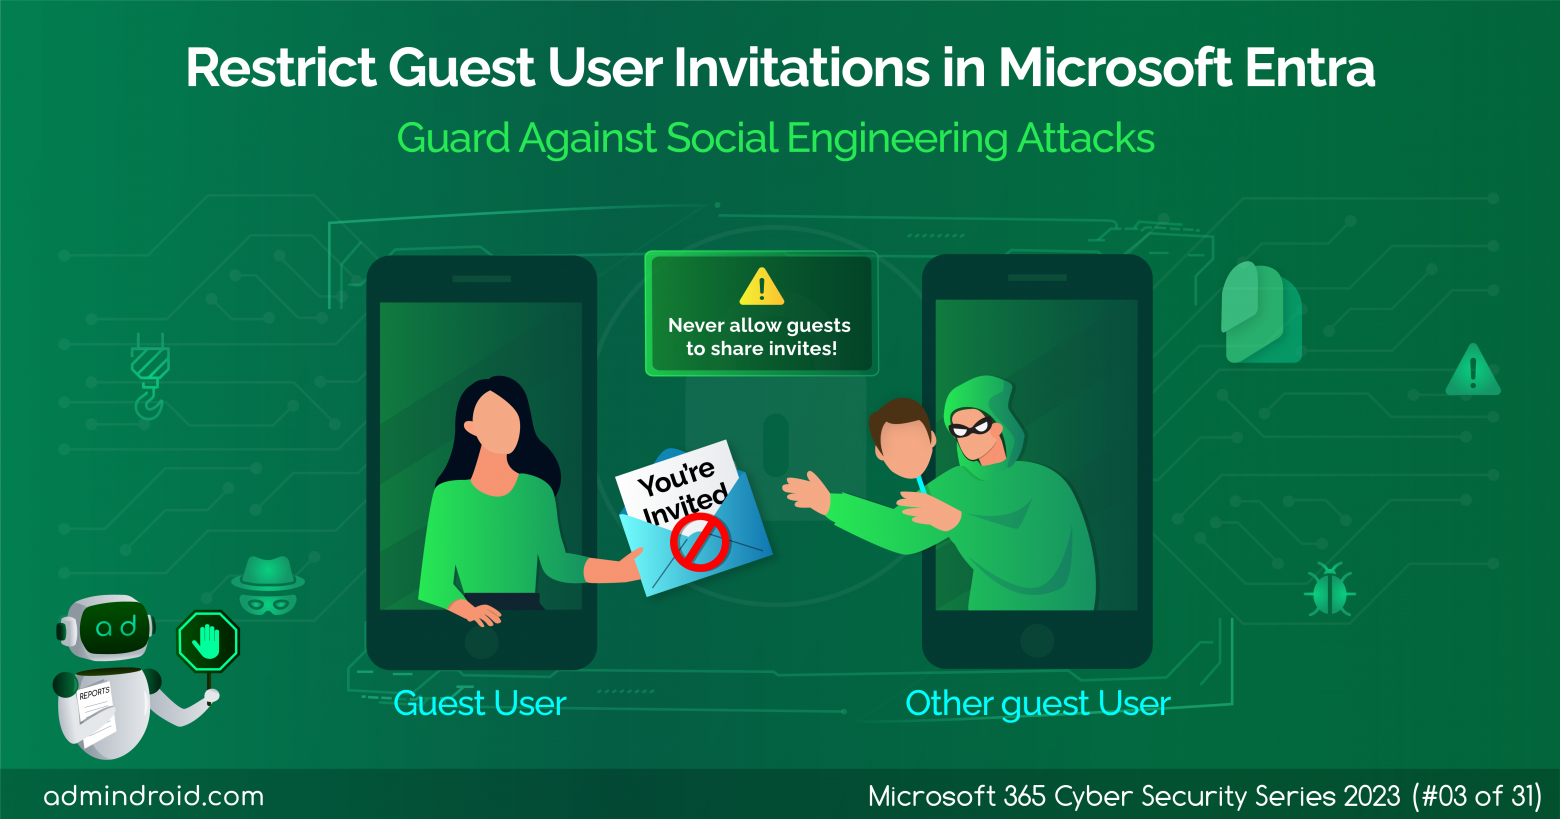 Restrict Guest User Invitations in Microsoft Entra